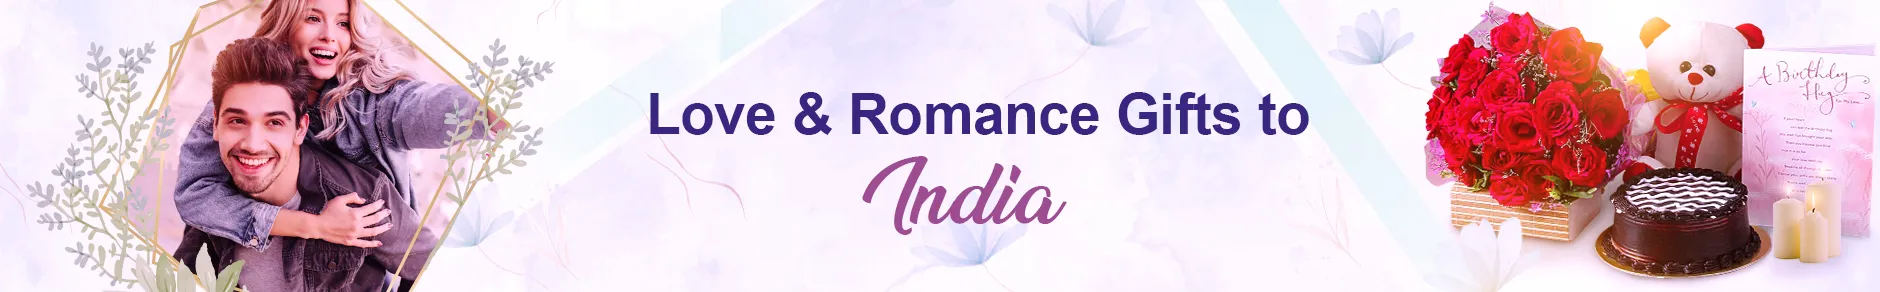 Love & Romance Gifts to India